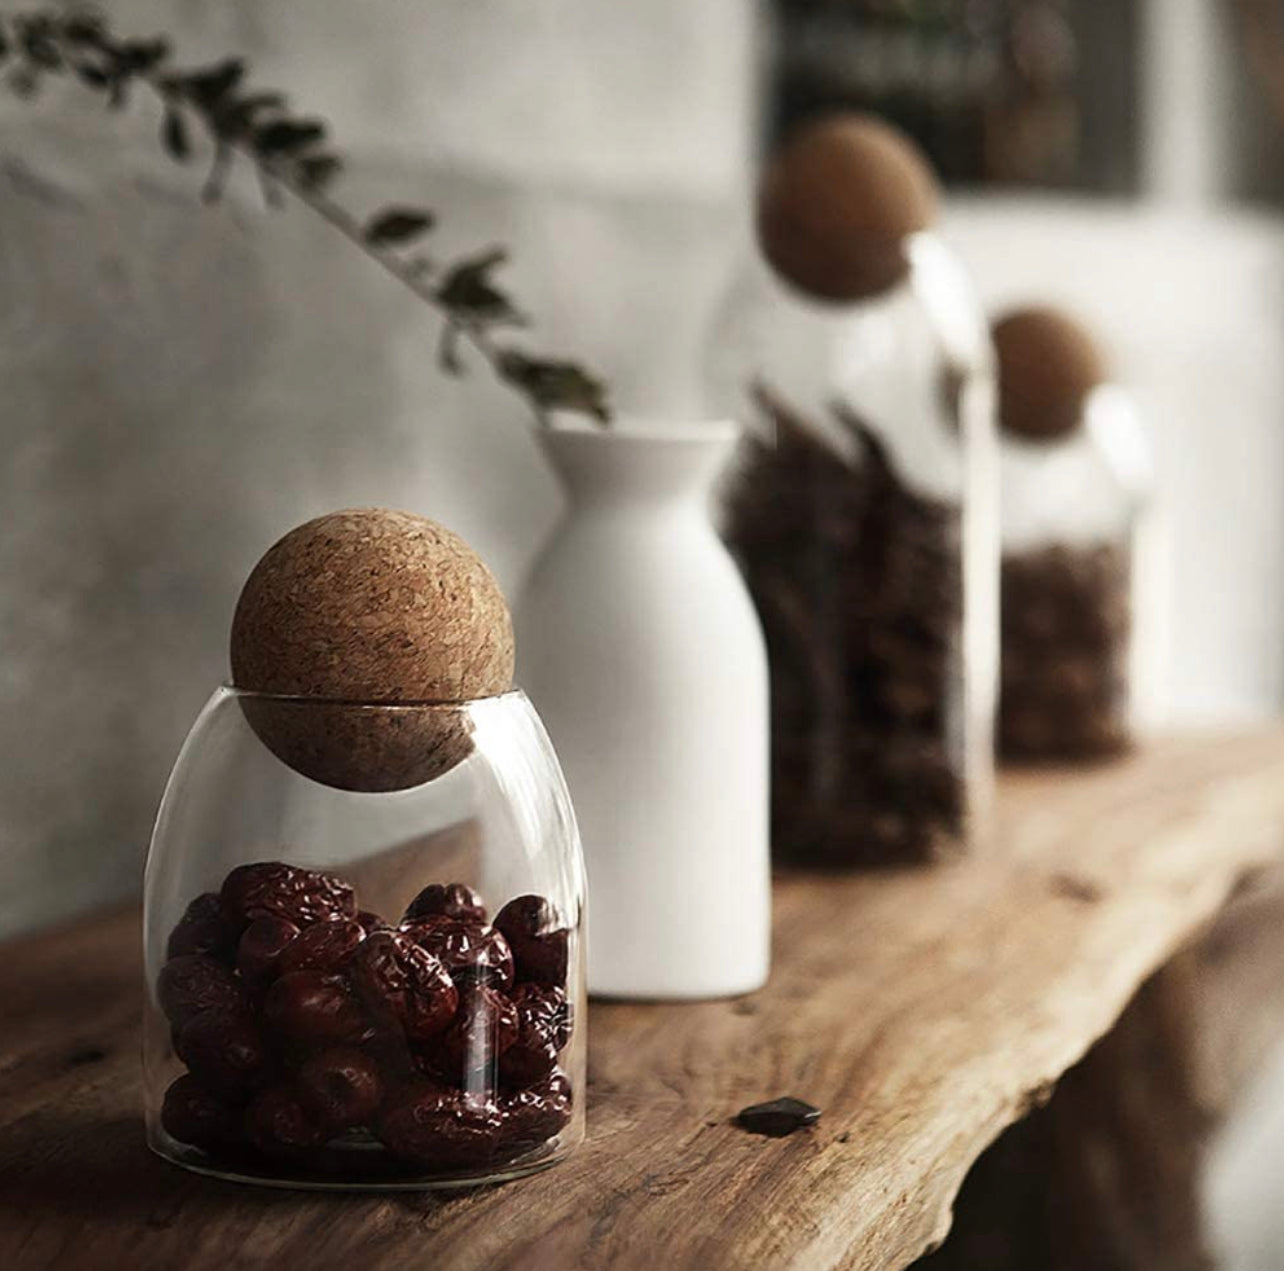 OSQI Storage Glass Jar with Ball Lid - Set of 3, Cute Decorative Round Jars  with Wood Ball Lid